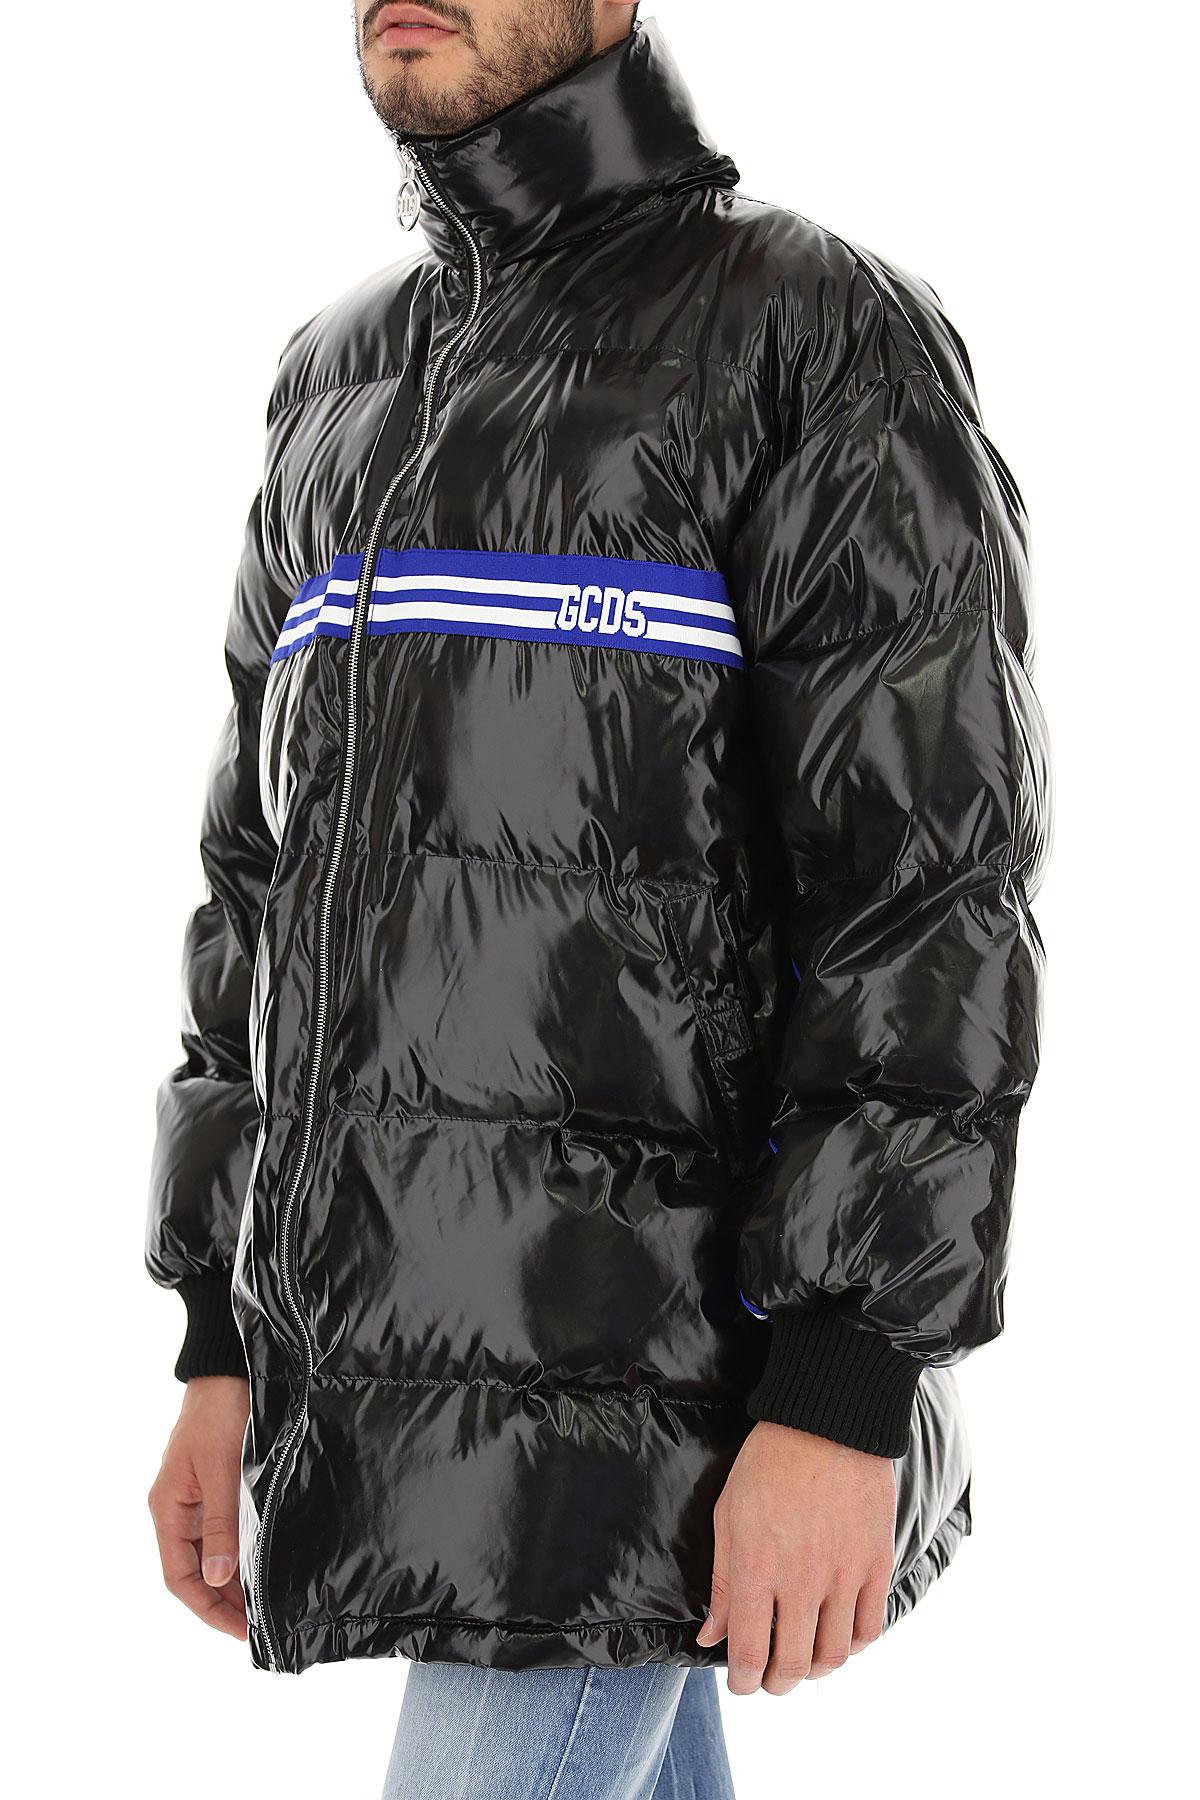 Gcds Synthetic Down Jacket in Black & Blue (Black) for Men - Save 66% - Lyst